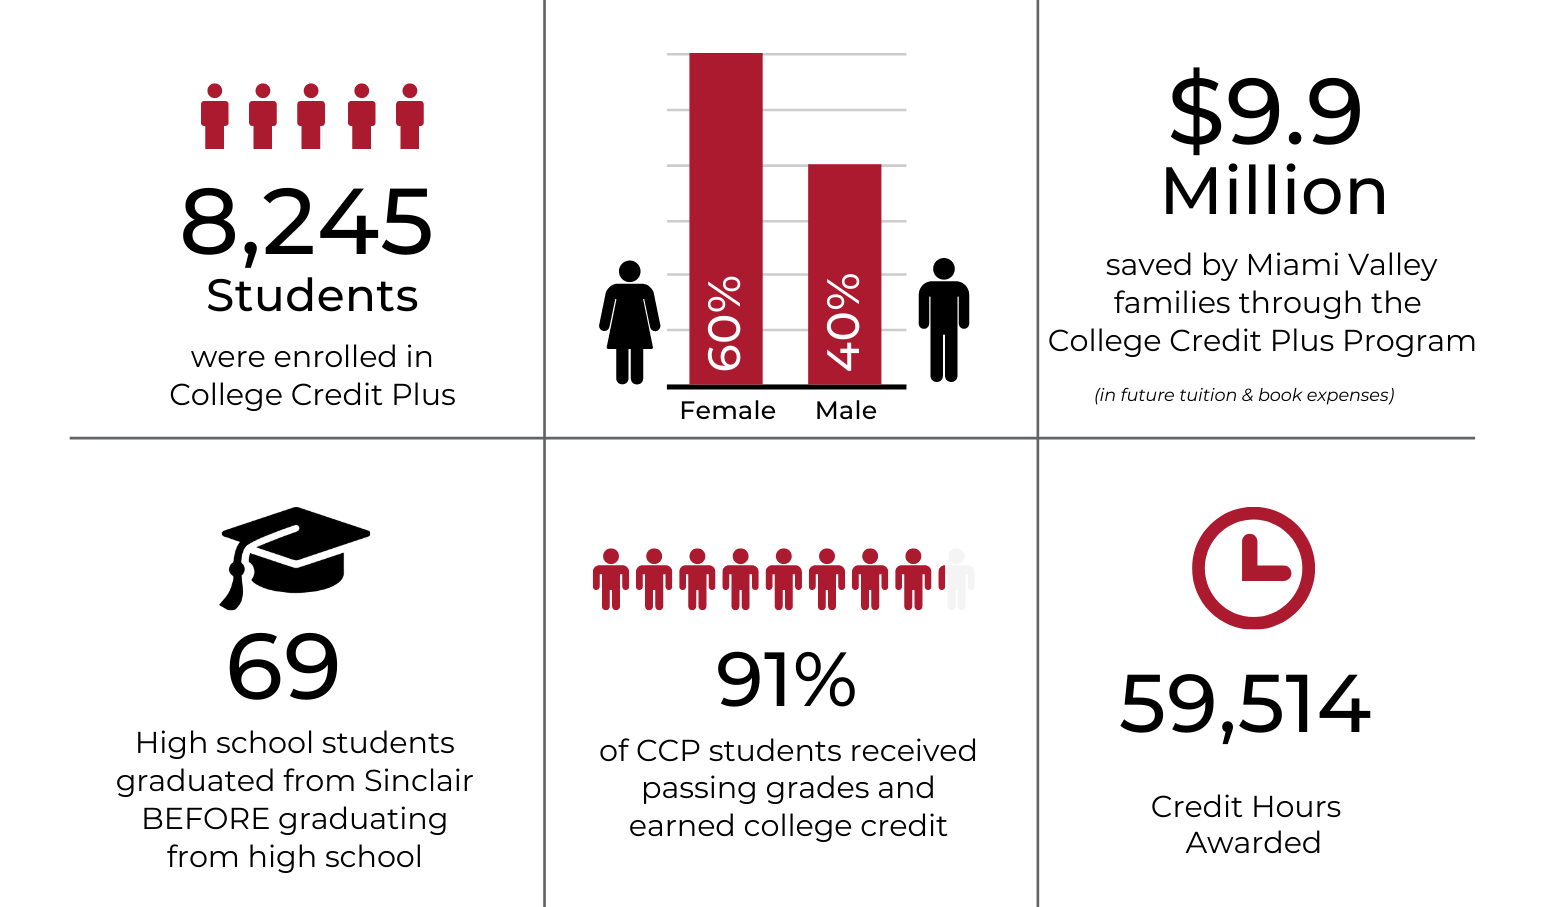 CCP Fast Facts for 2021-22 include 8,245 students enrolled in CCP at Sinclair; 60% were female and 40% were male; $9.9 million dollars was saved by Miami Valley families in college-related costs; 69 high school students graduated from Sinclair before graduating from high school; 91% of CCP students received passing grades and earned college credit; 59,514 credit hours were awarded